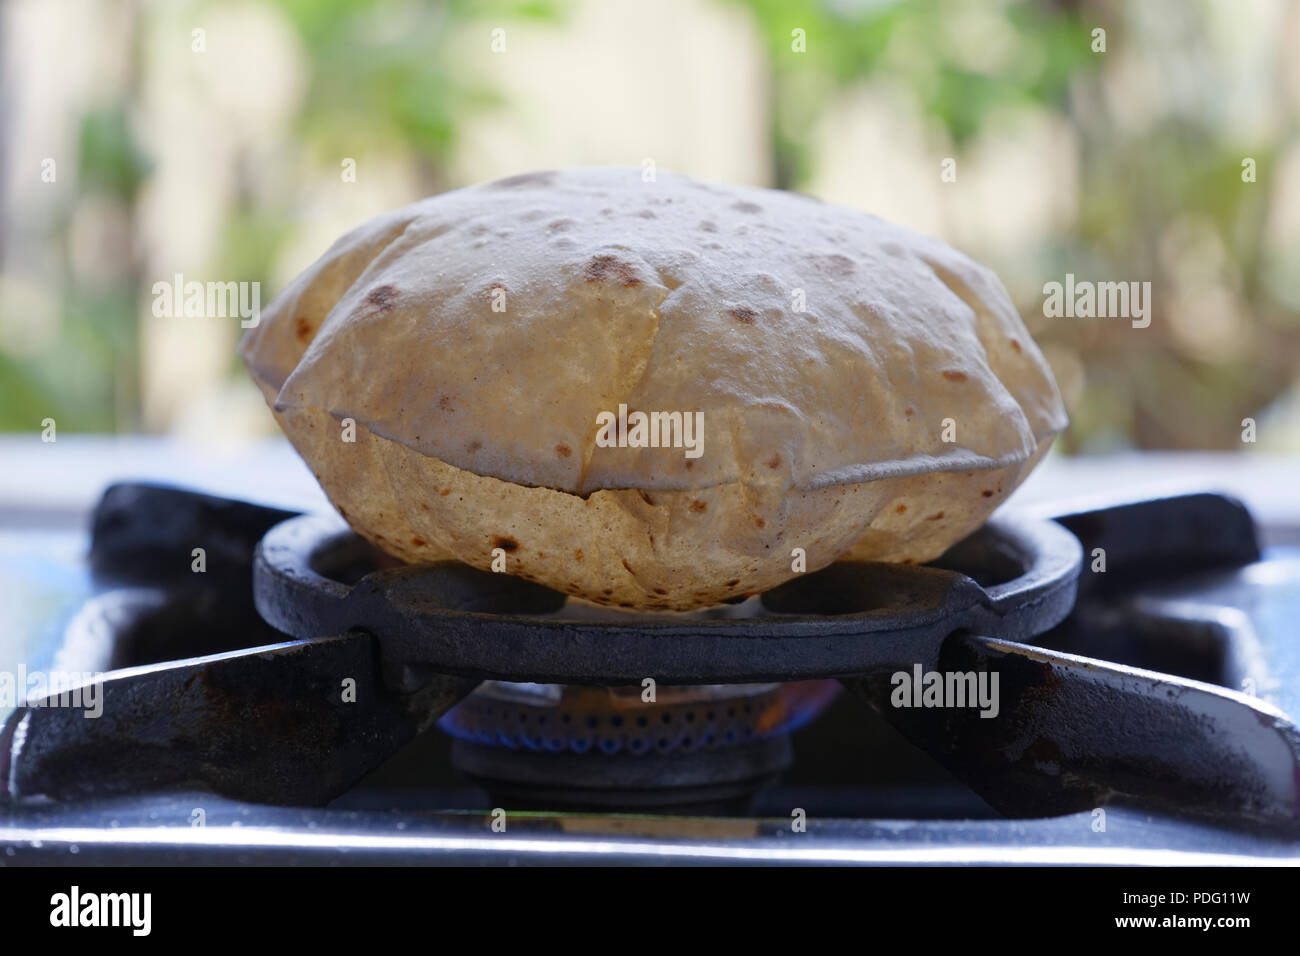 https://c8.alamy.com/comp/PDG11W/phulka-a-kind-of-chapati-home-made-indian-thin-bread-being-cooked-on-gas-stove-at-home-PDG11W.jpg